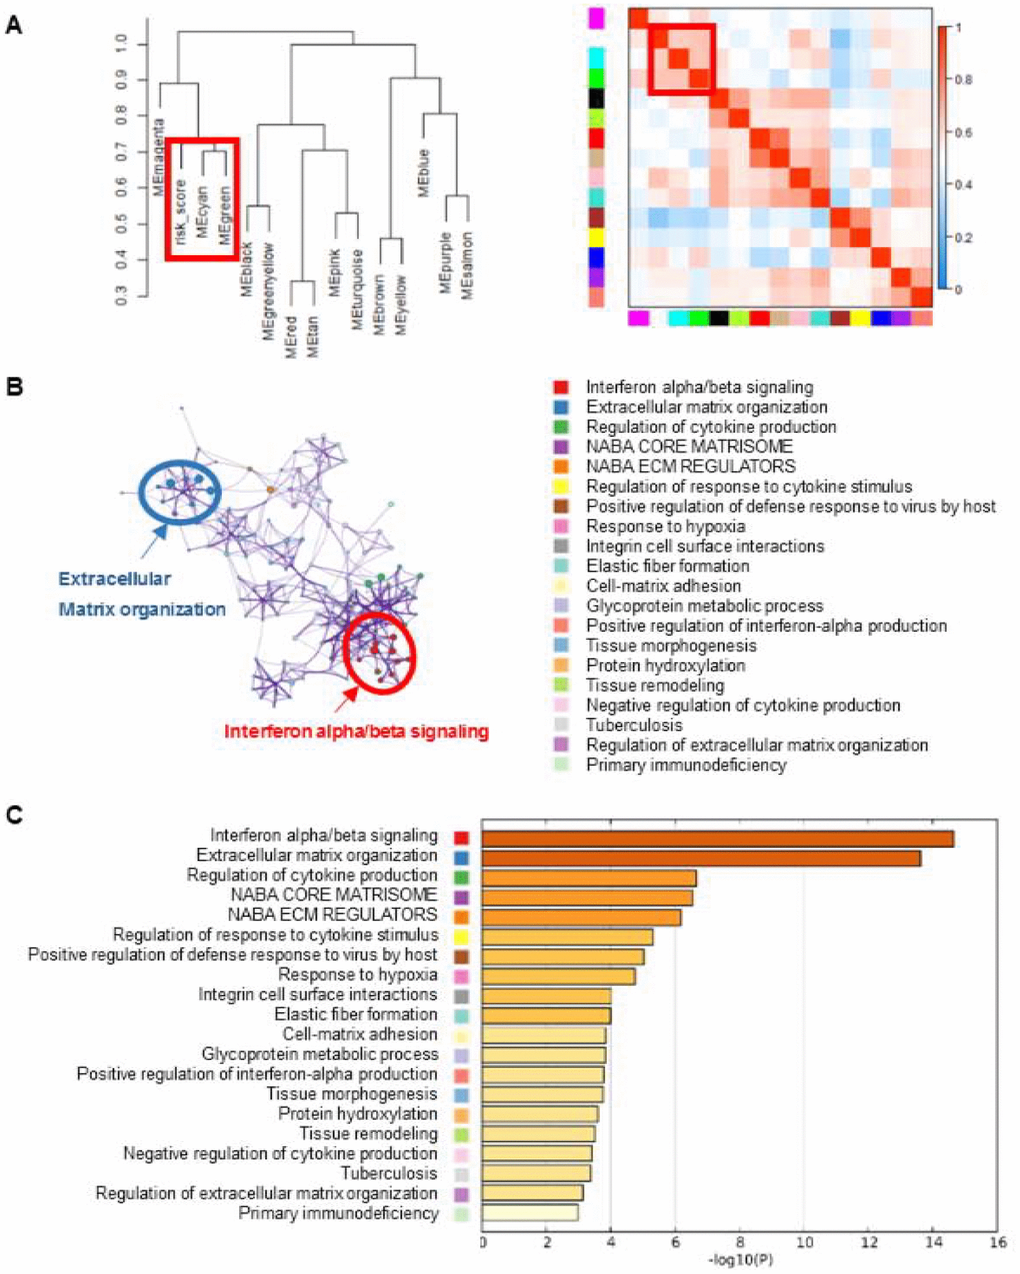 Gene enrichment analysis of the lncRNA-signature. (A) WGCNA method were performed to cluster genes that highly correlated with the risk scores. Clustering dendrogram and eigengene adjacency heatmap were generated using genes associated with the eight-lncRNA signature. (B) The pathways related with eight-lncRNA signature were clustered using Metascape. The cluster was made up of the best enriched pathways. The top 20 enriched pathways were shown (right panel) and the top 2 enriched pathways were marked (left panel). (C) The histogram of the top 20 enriched pathways associated with risk score was arranged by -Log10P value. Each bar represented one enriched term and was colored by -Log10P value.